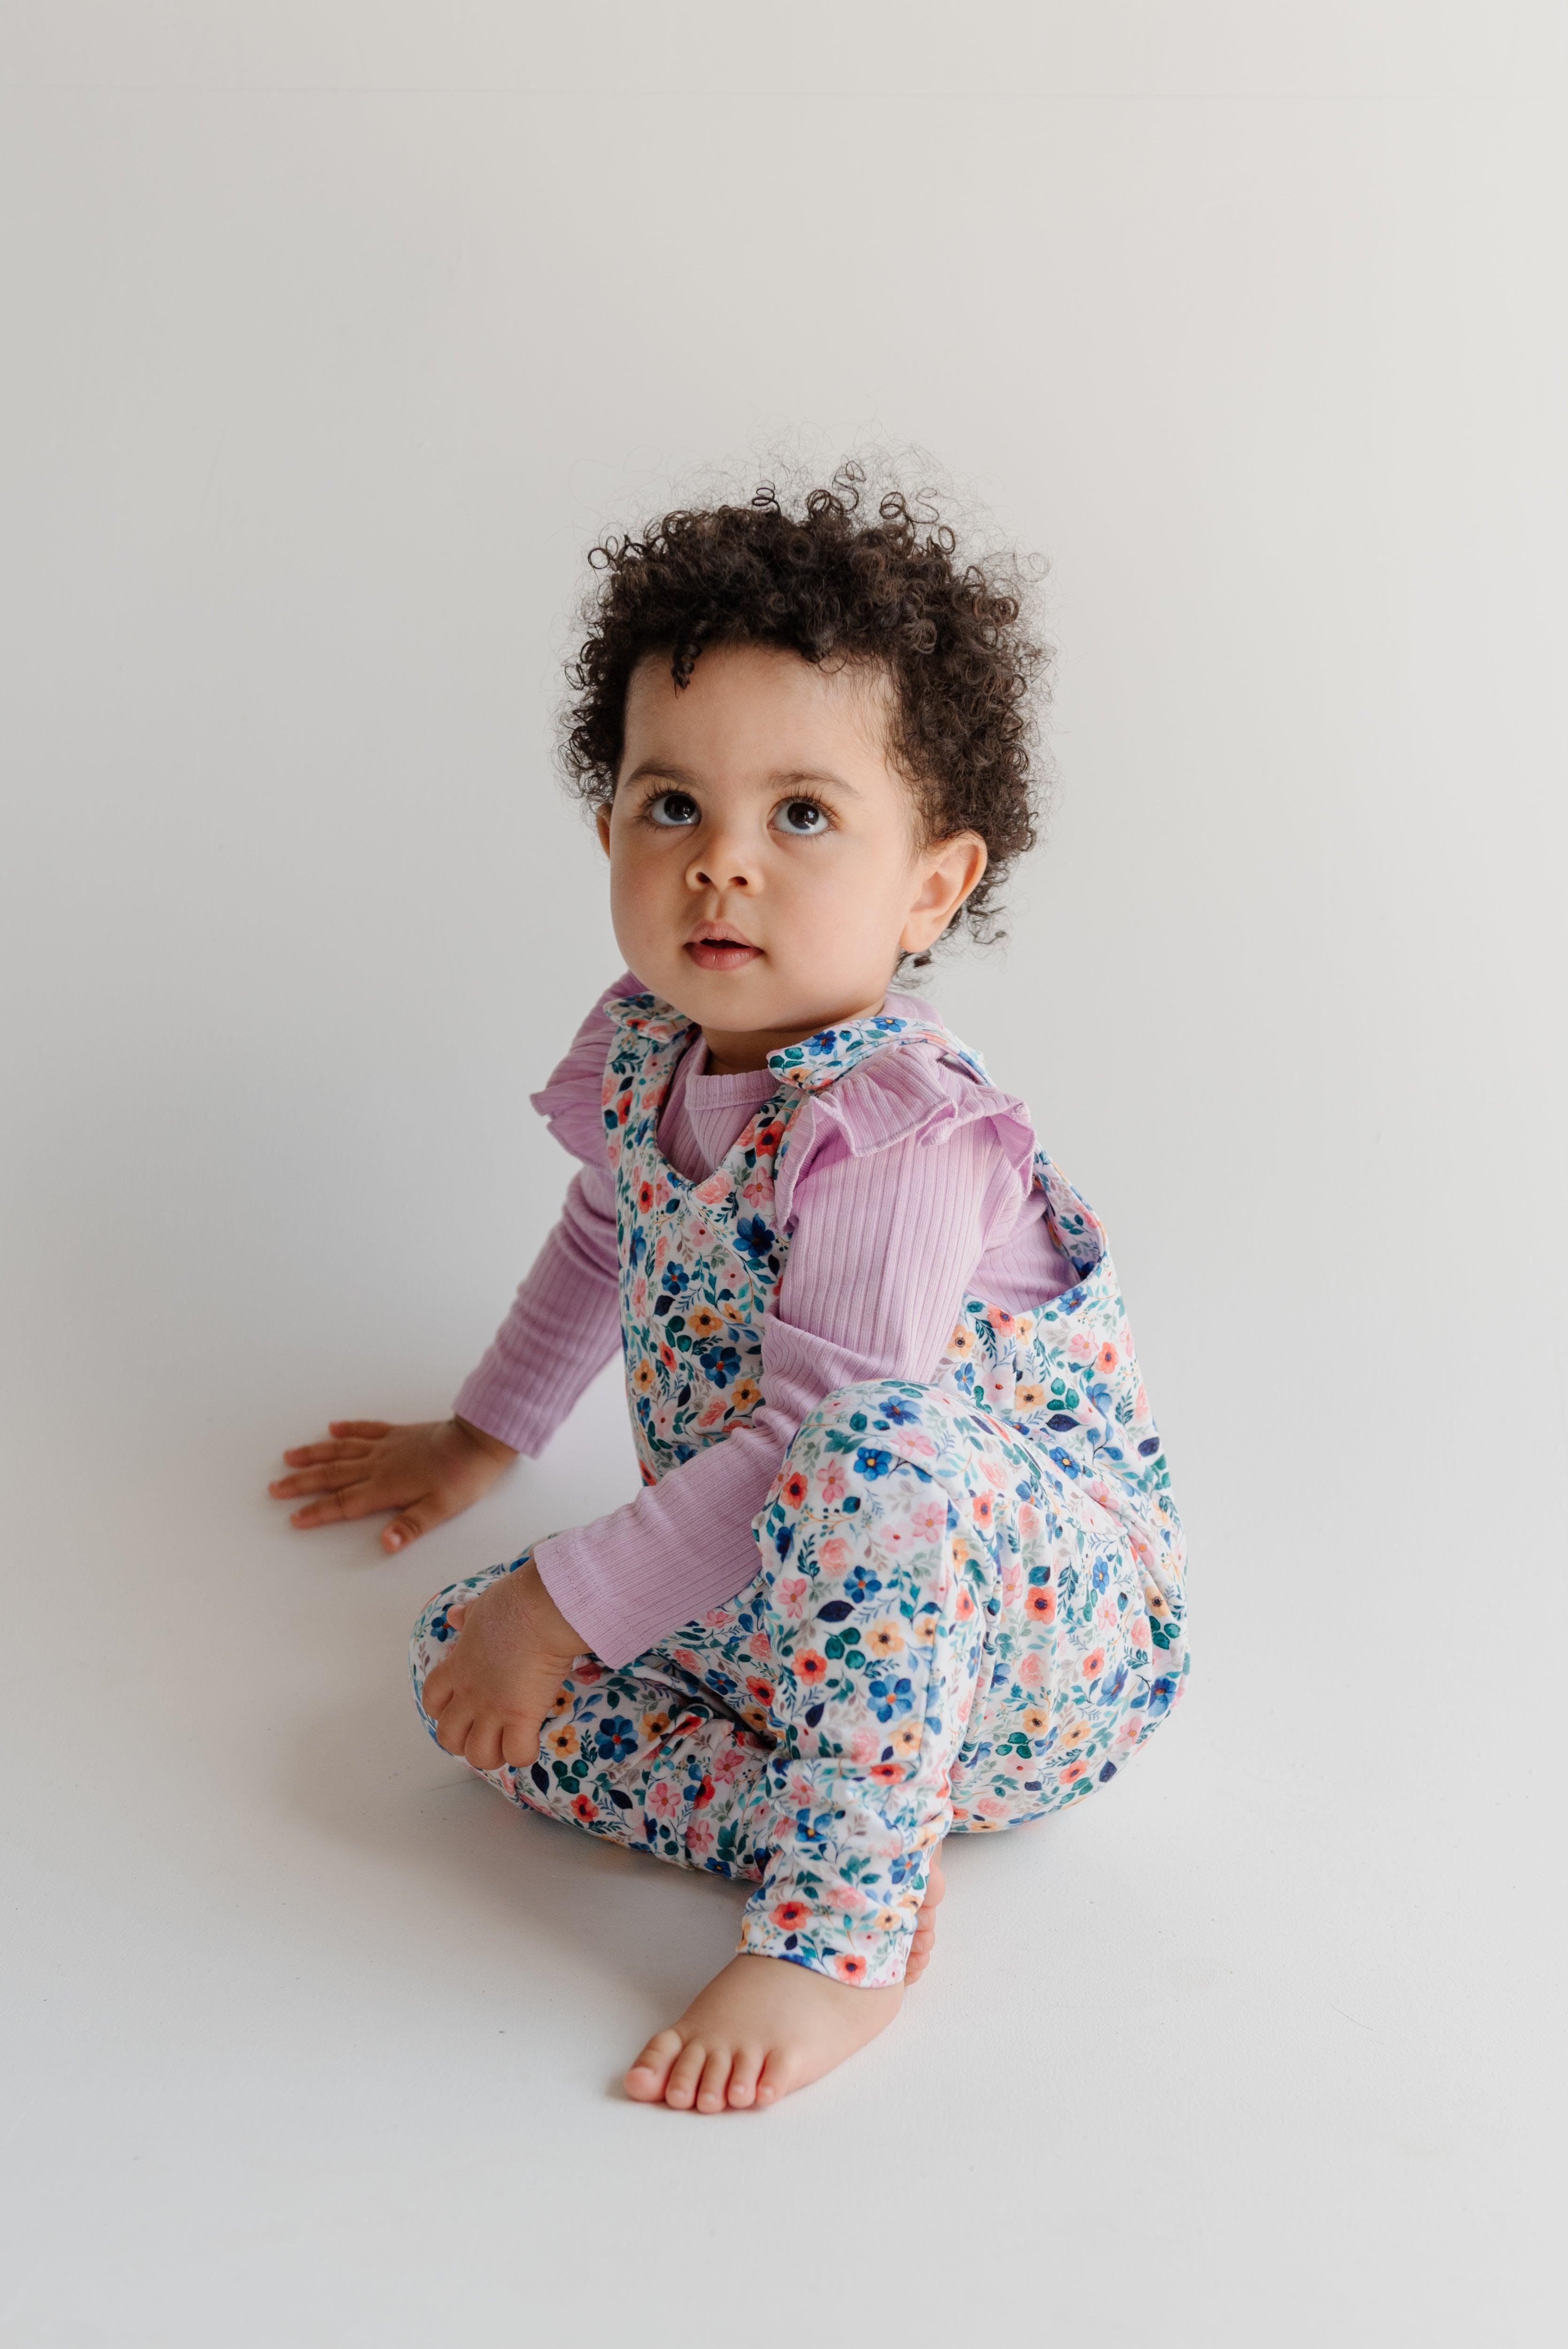 files/white-dainty-floral-dungaree-romper-claybearofficial-4.jpg